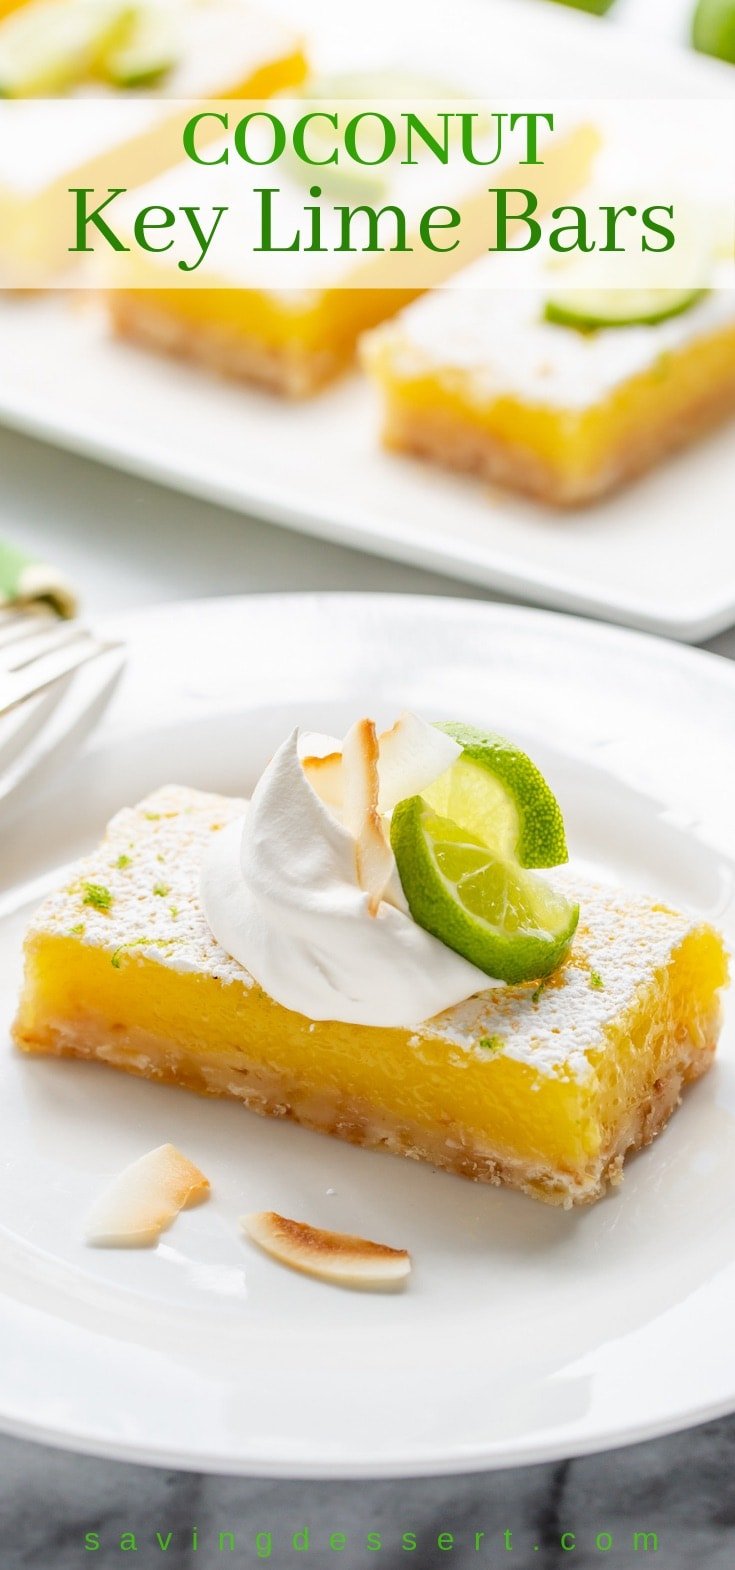 Coconut Key Lime Bars topped with lime wedges, toasted coconut and a dollop whipped cream